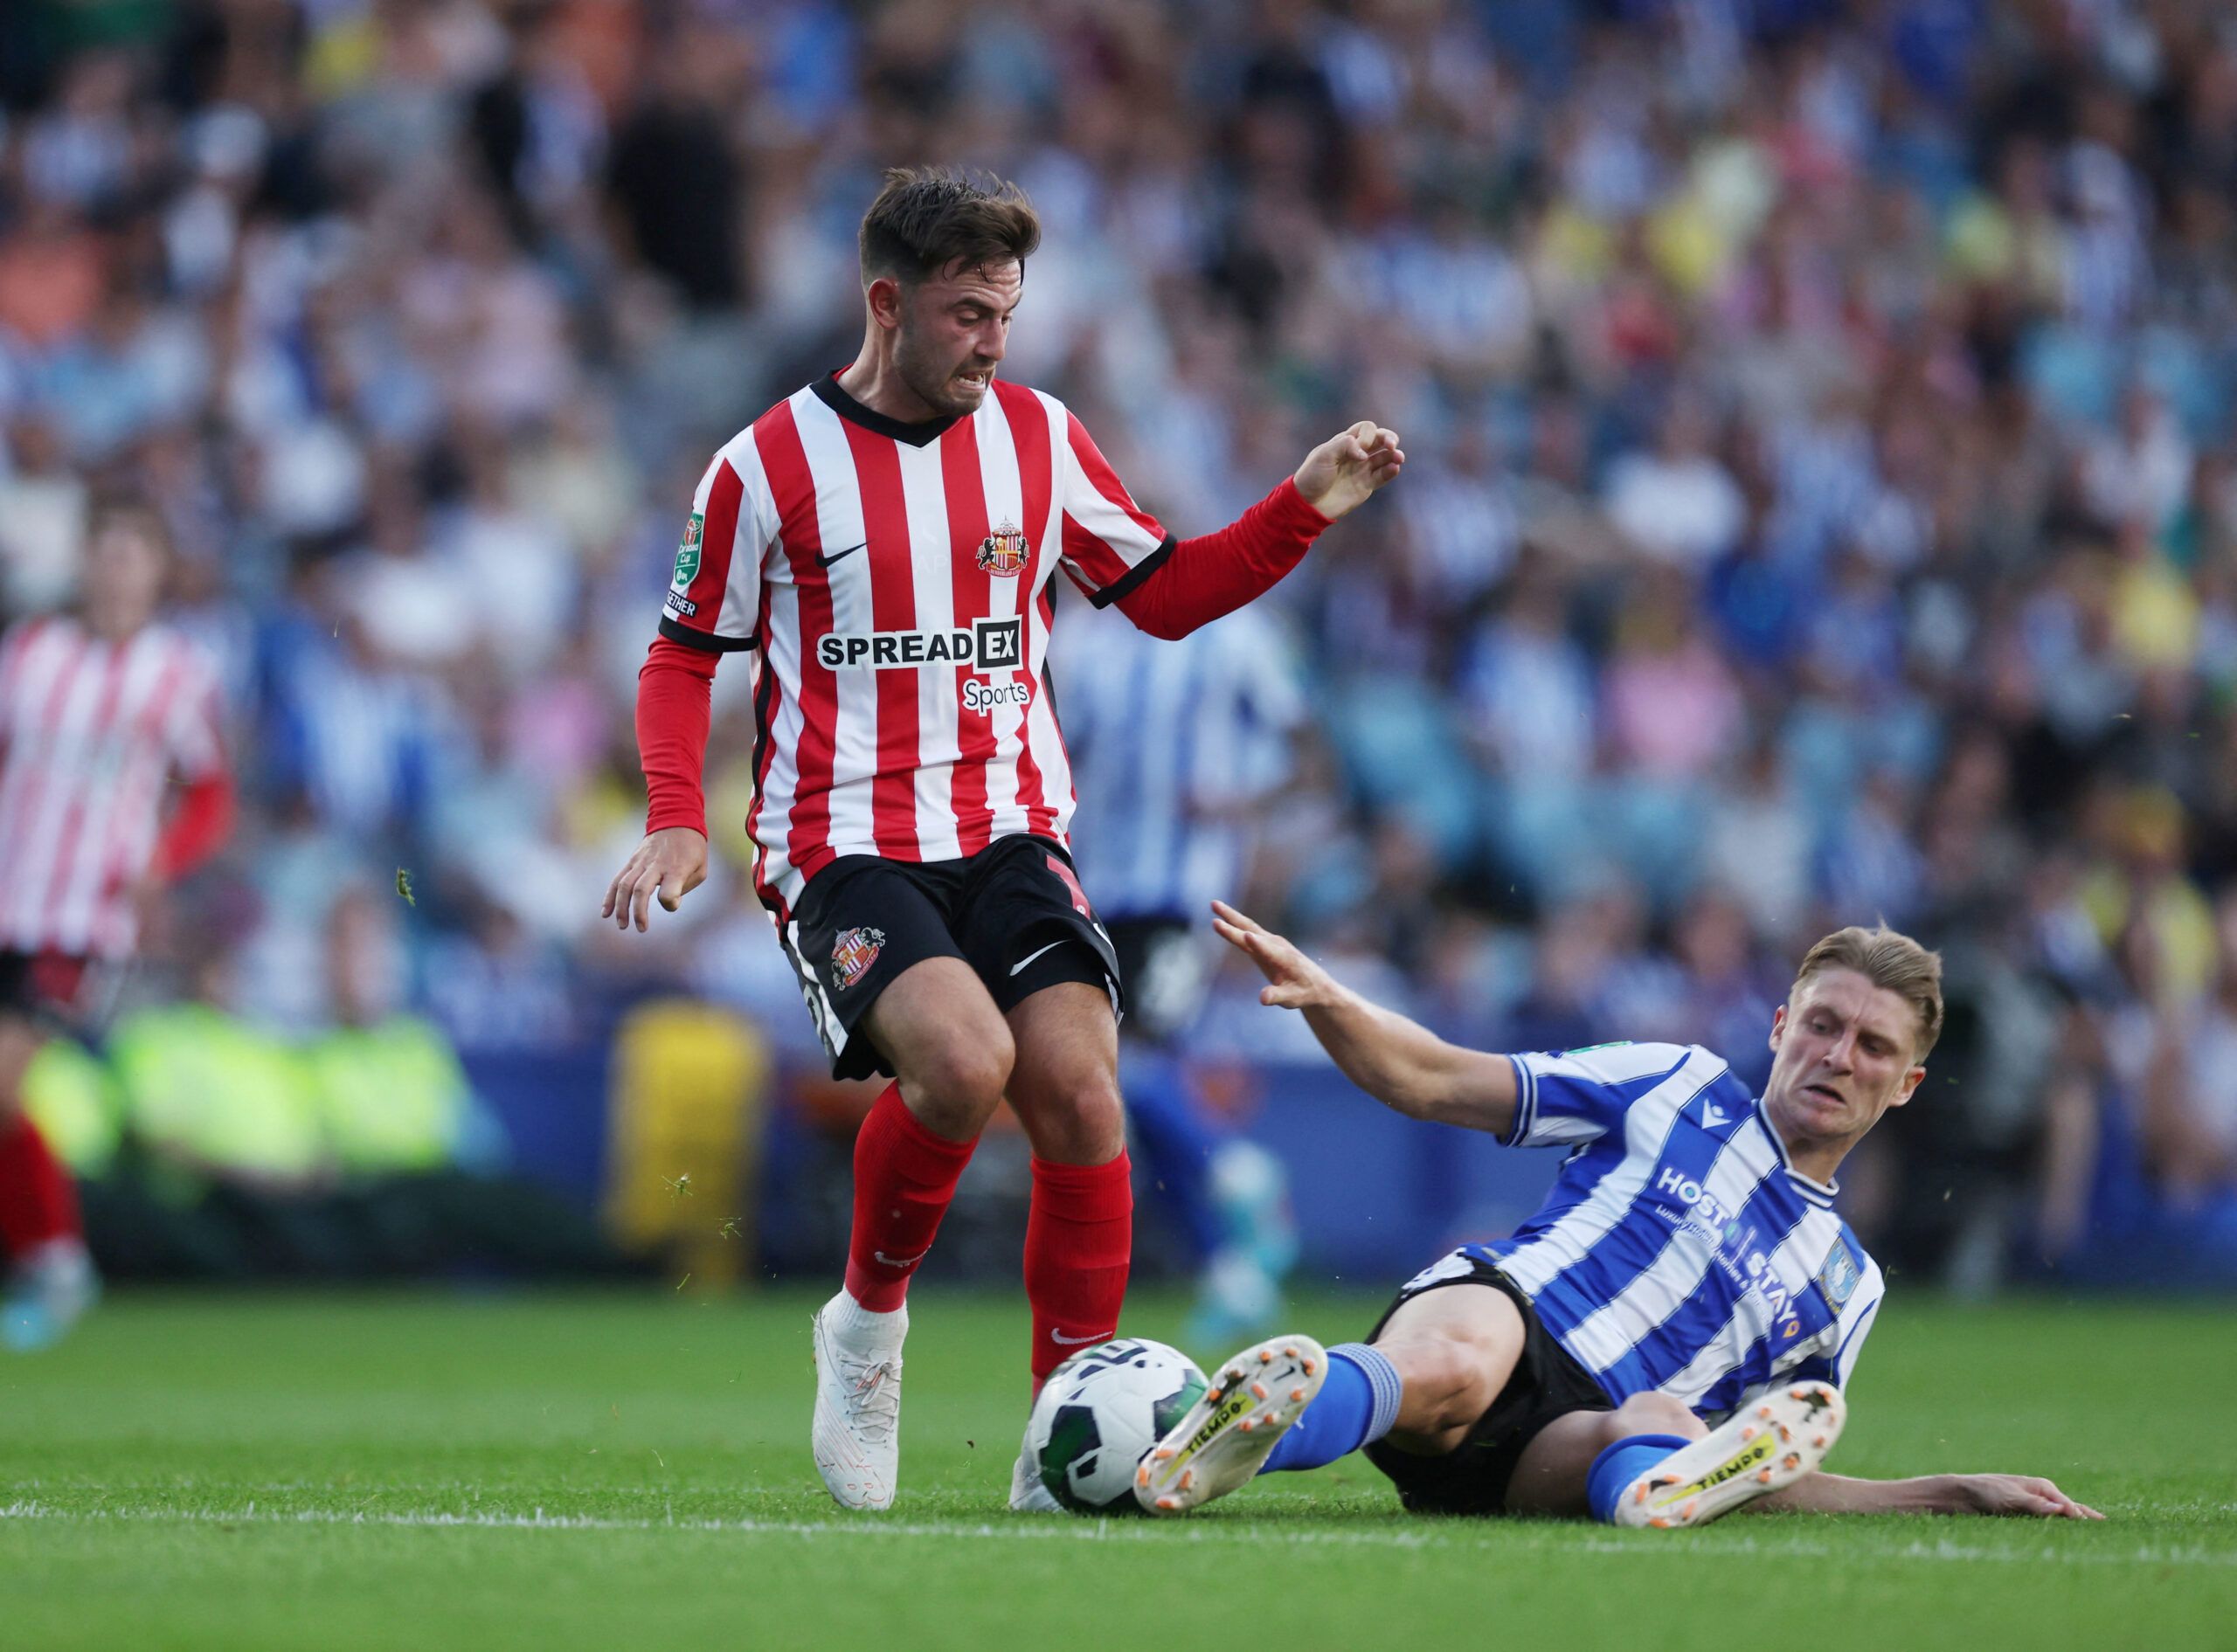 Soccer Football - Carabao Cup - Sheffield Wednesday v Sunderland - Hillsborough Stadium, Sheffield, Britain - August 10, 2022 Sunderland’s Patrick Roberts in action with Sheffield Wednesday’s George Byers  Action Images/Lee Smith  EDITORIAL USE ONLY. No use with unauthorized audio, video, data, fixture lists, club/league logos or 